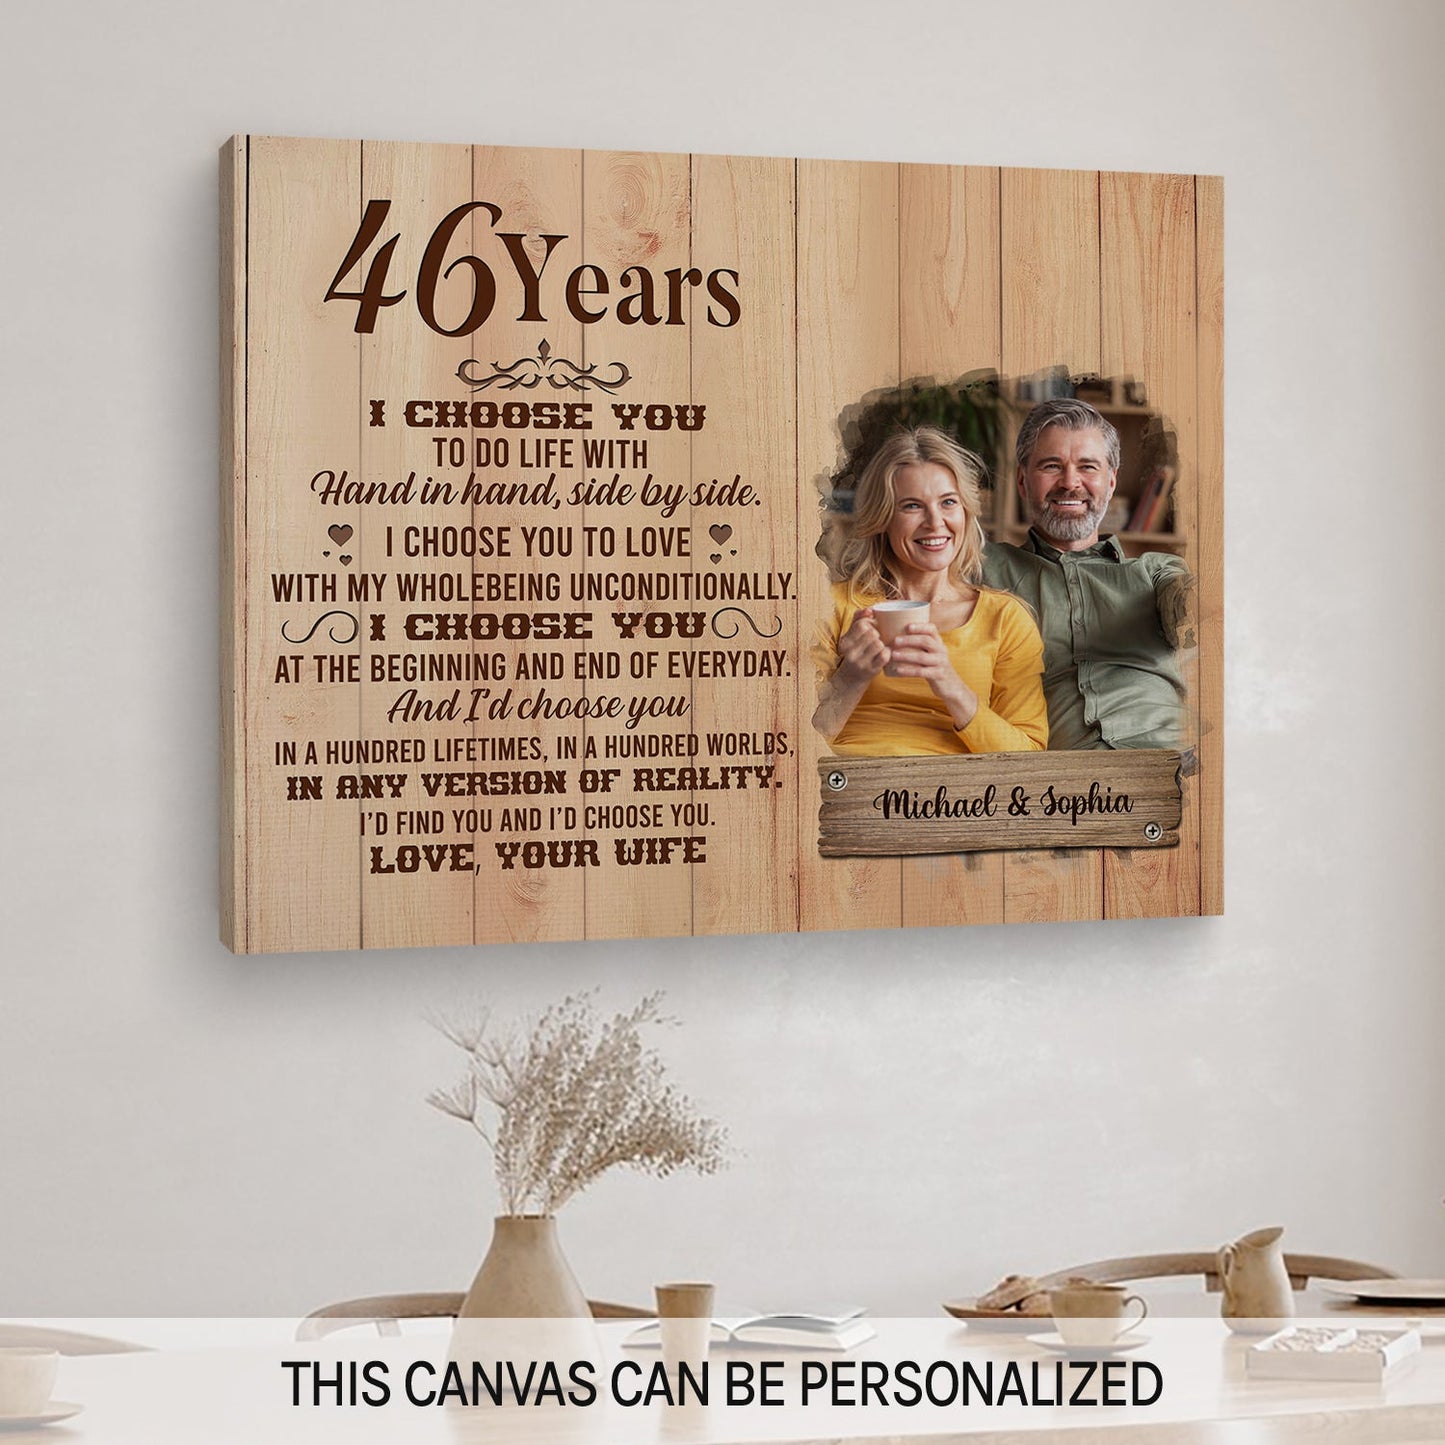 41 Years - Personalized 41 Year Anniversary gift For Parents, Husband or Wife - Custom Canvas Print - MyMindfulGifts